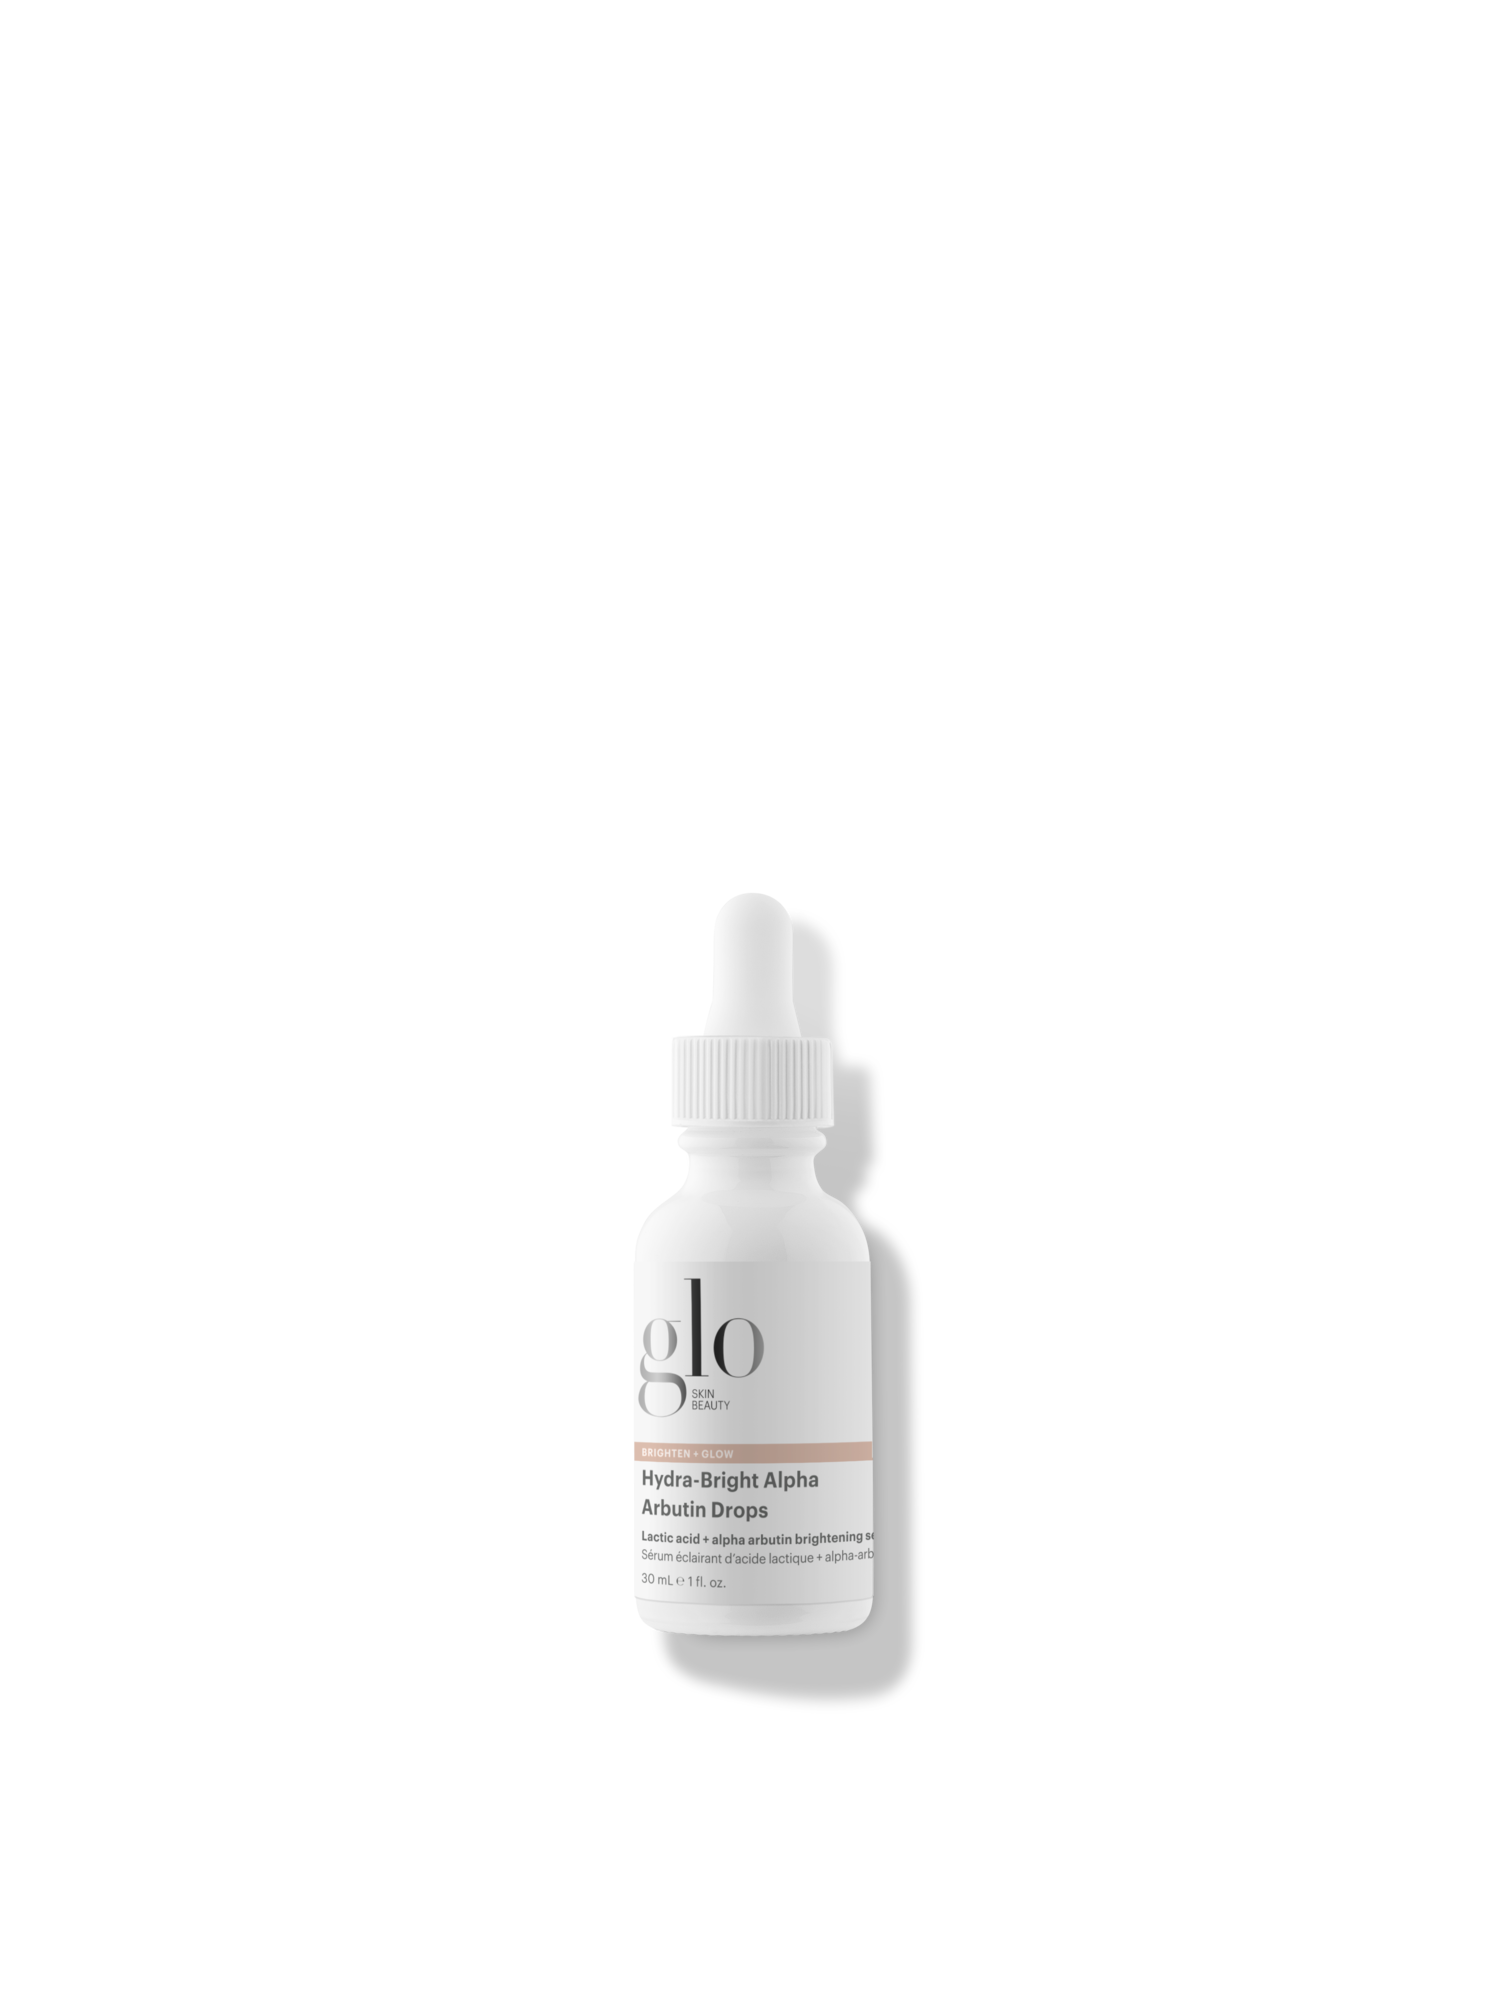 Hydra Bright Alpha Arbutin Drops Glo Skin Beauty Br Formerly Know As Brightening Serum Becky Louise Beauty Clinic